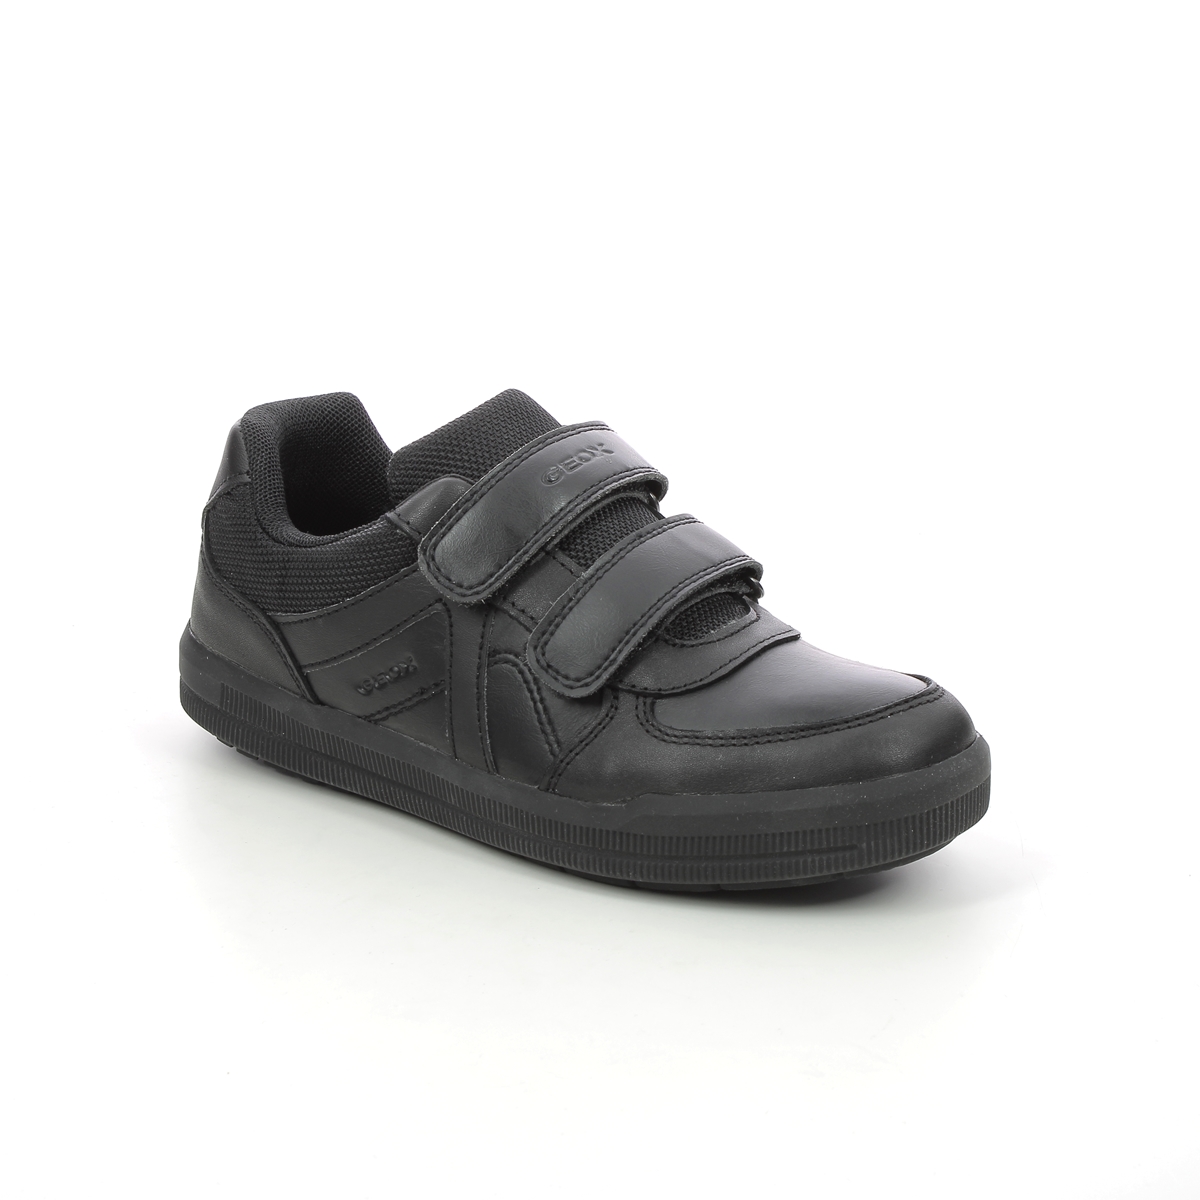 Geox - Arzach Boy Vel (Black Leather) J844Ae-C9999 In Size 34 In Plain Black Leather For School For kids